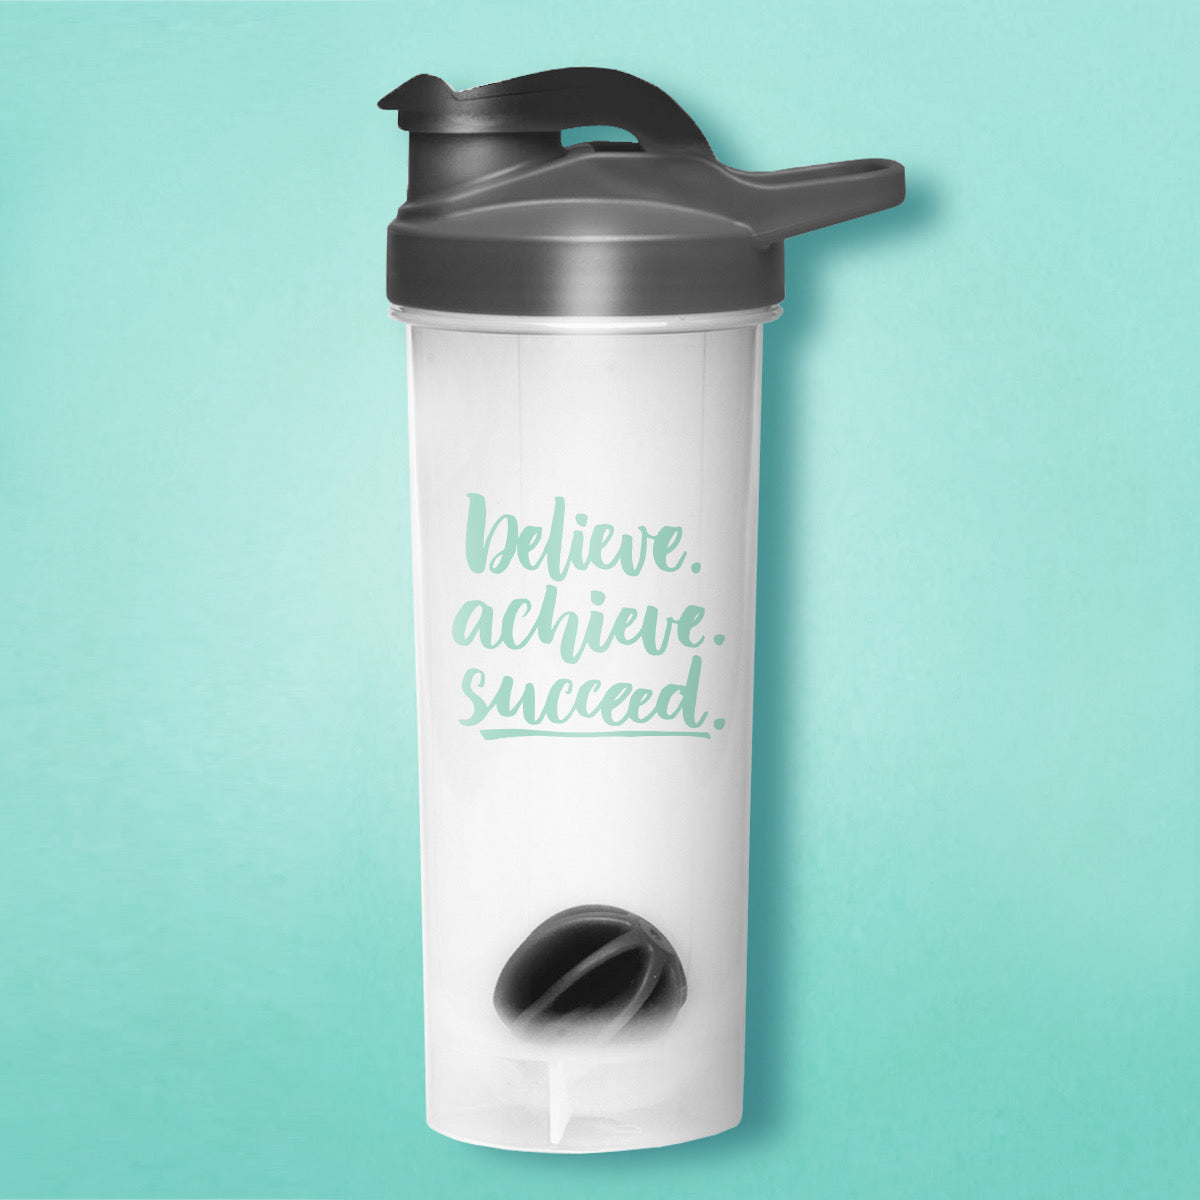 Bariatric Eating: The Powerball Protein Powder Shaker Bottle